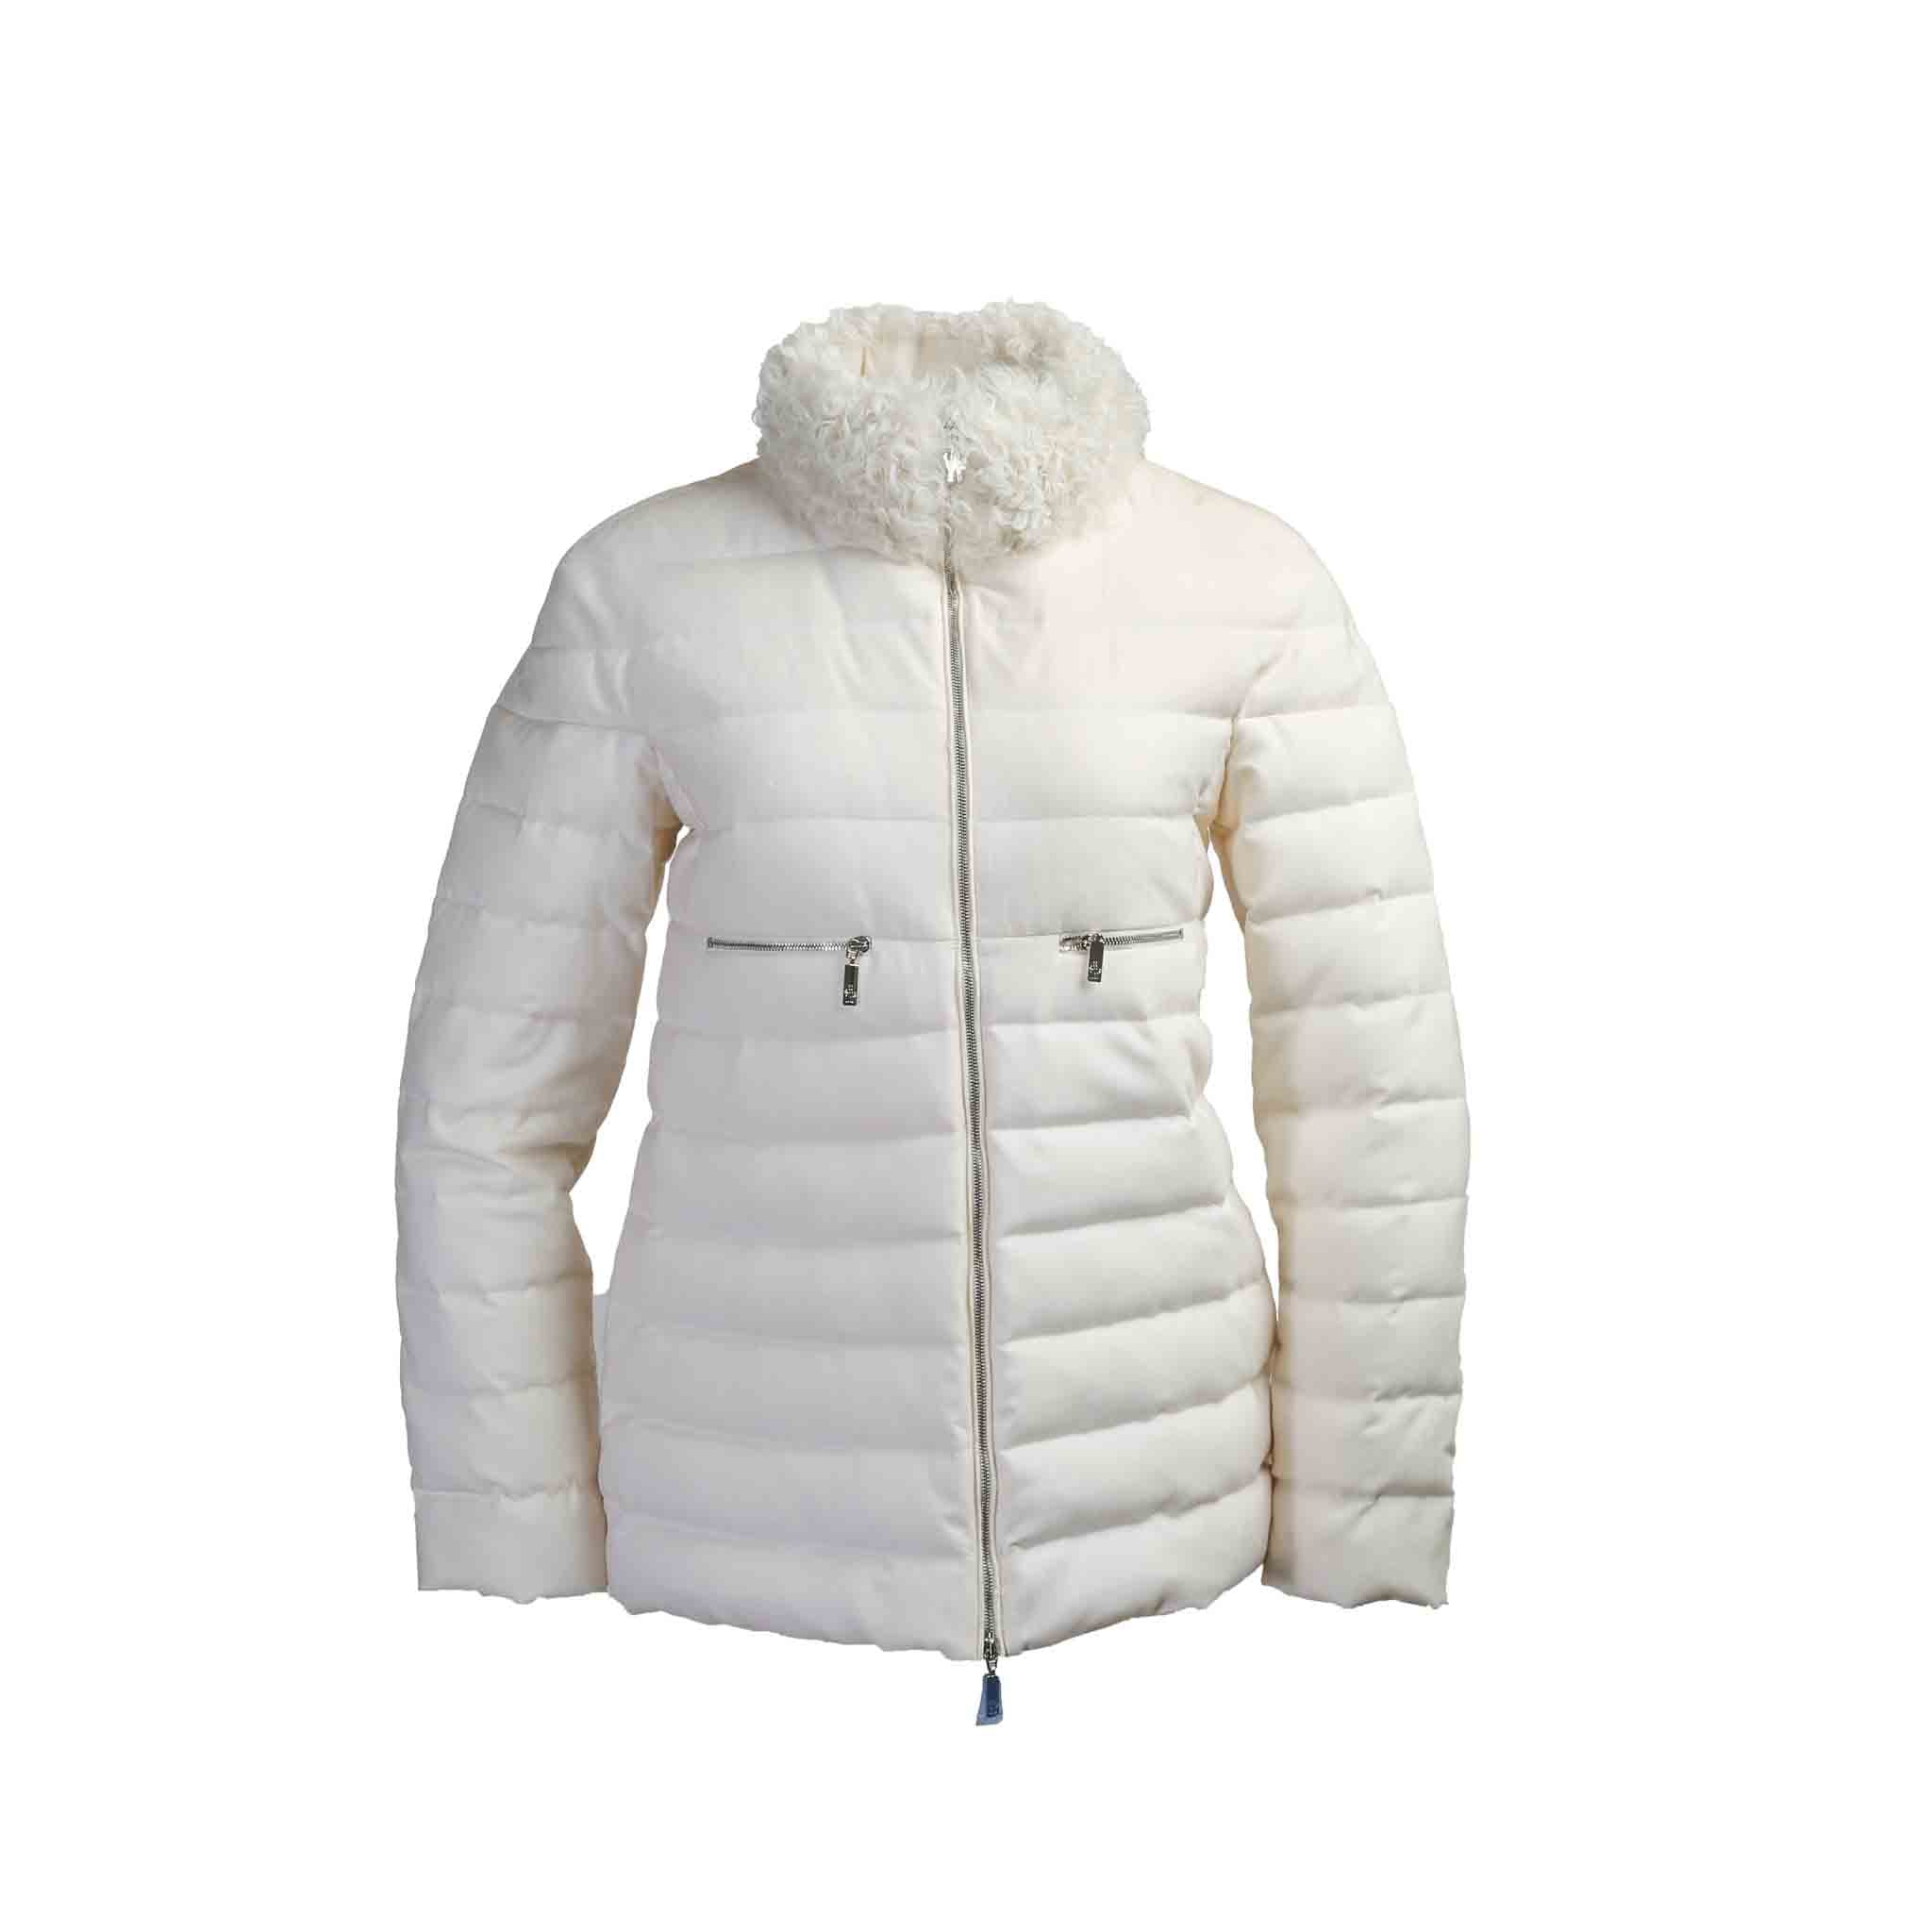 Moncler Gamme Rouge Womens Arnica Jacket in White